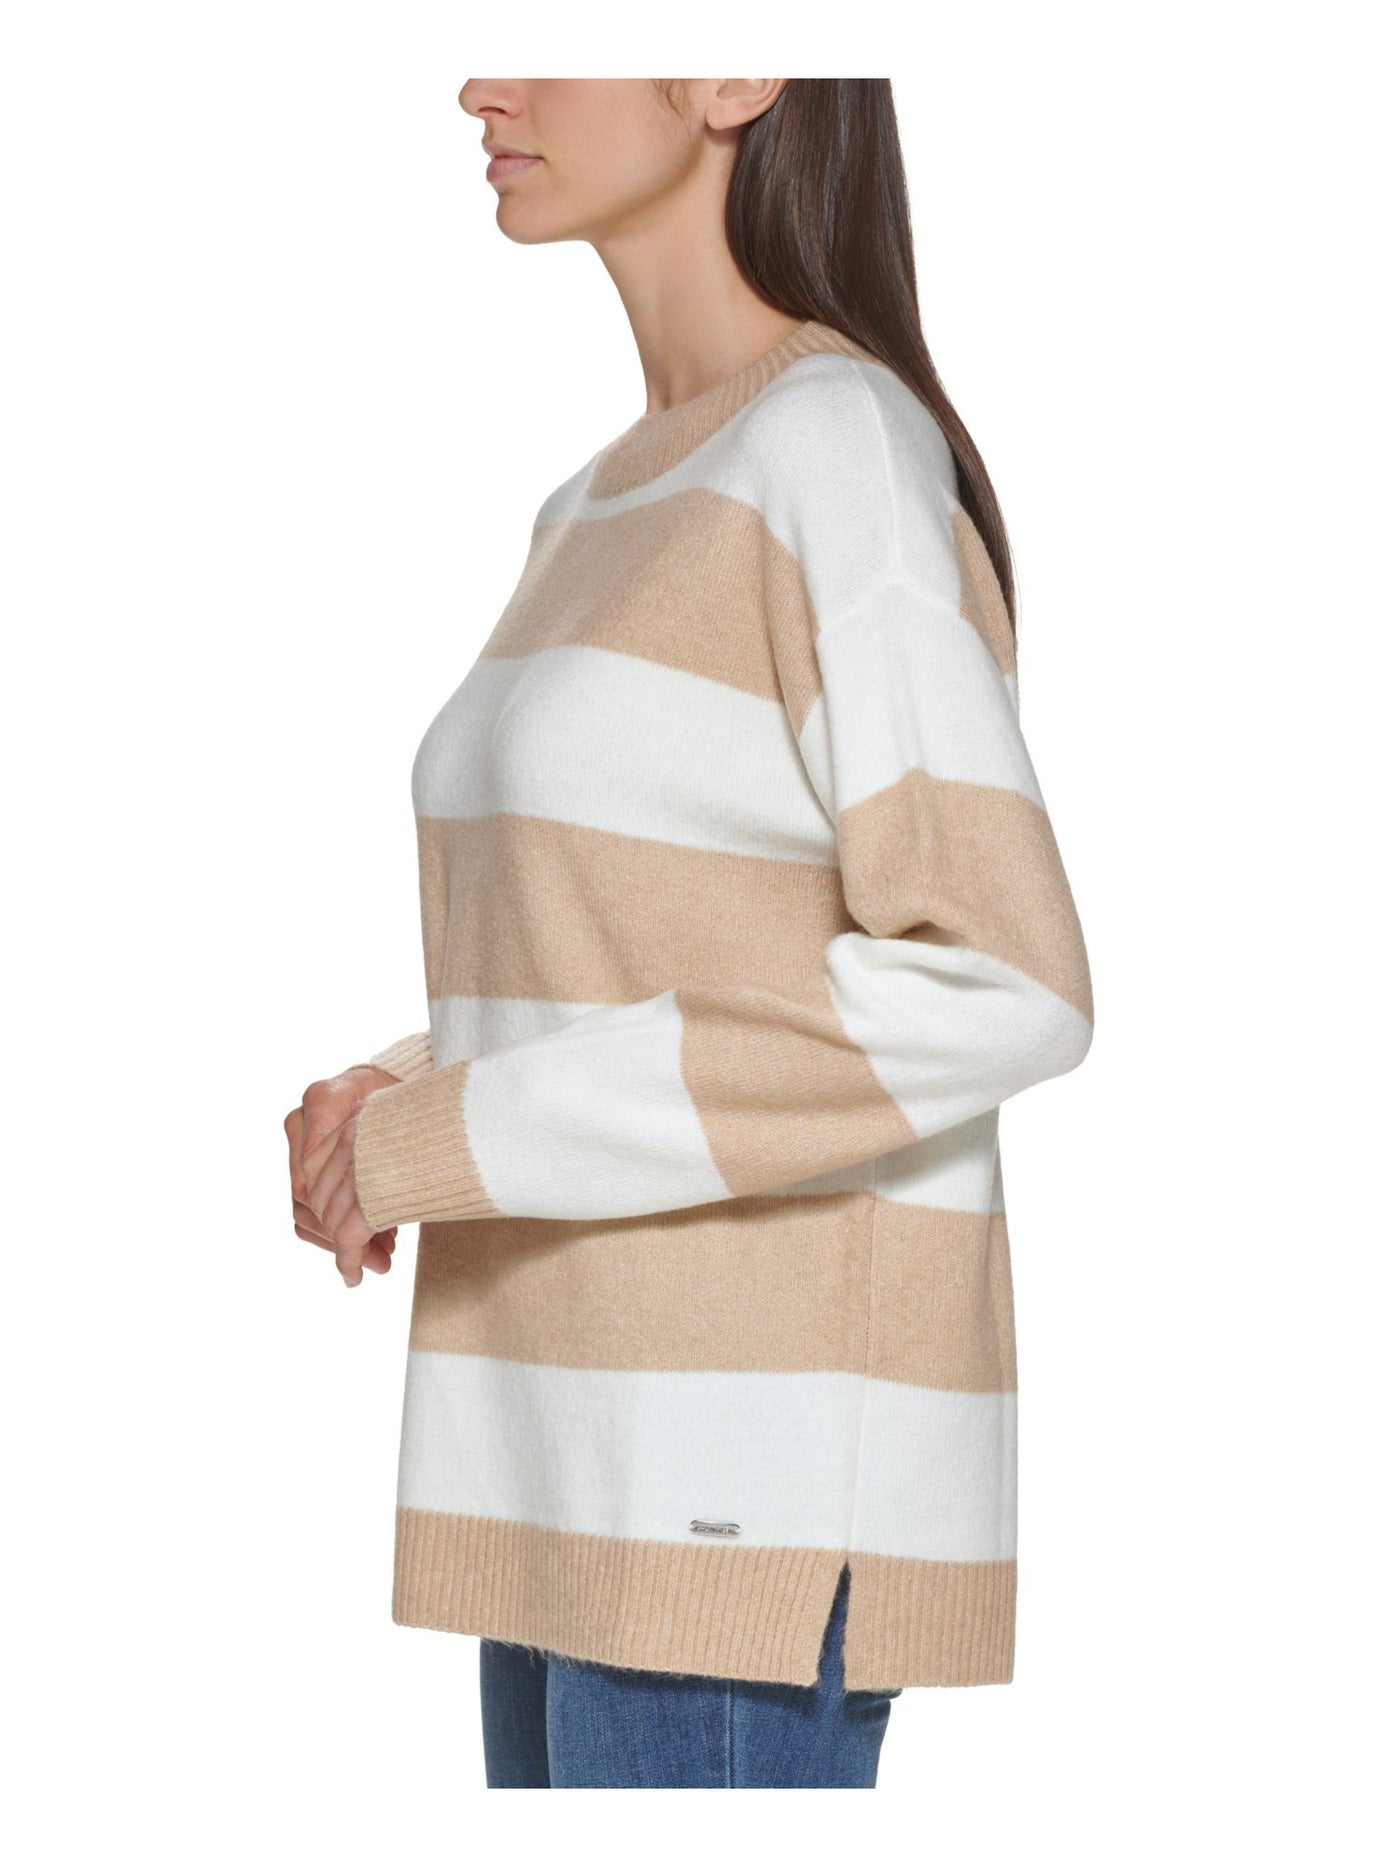 CALVIN KLEIN Womens Beige Ribbed Pullover Drop Shoulders Striped Long Sleeve Crew Neck Sweater L